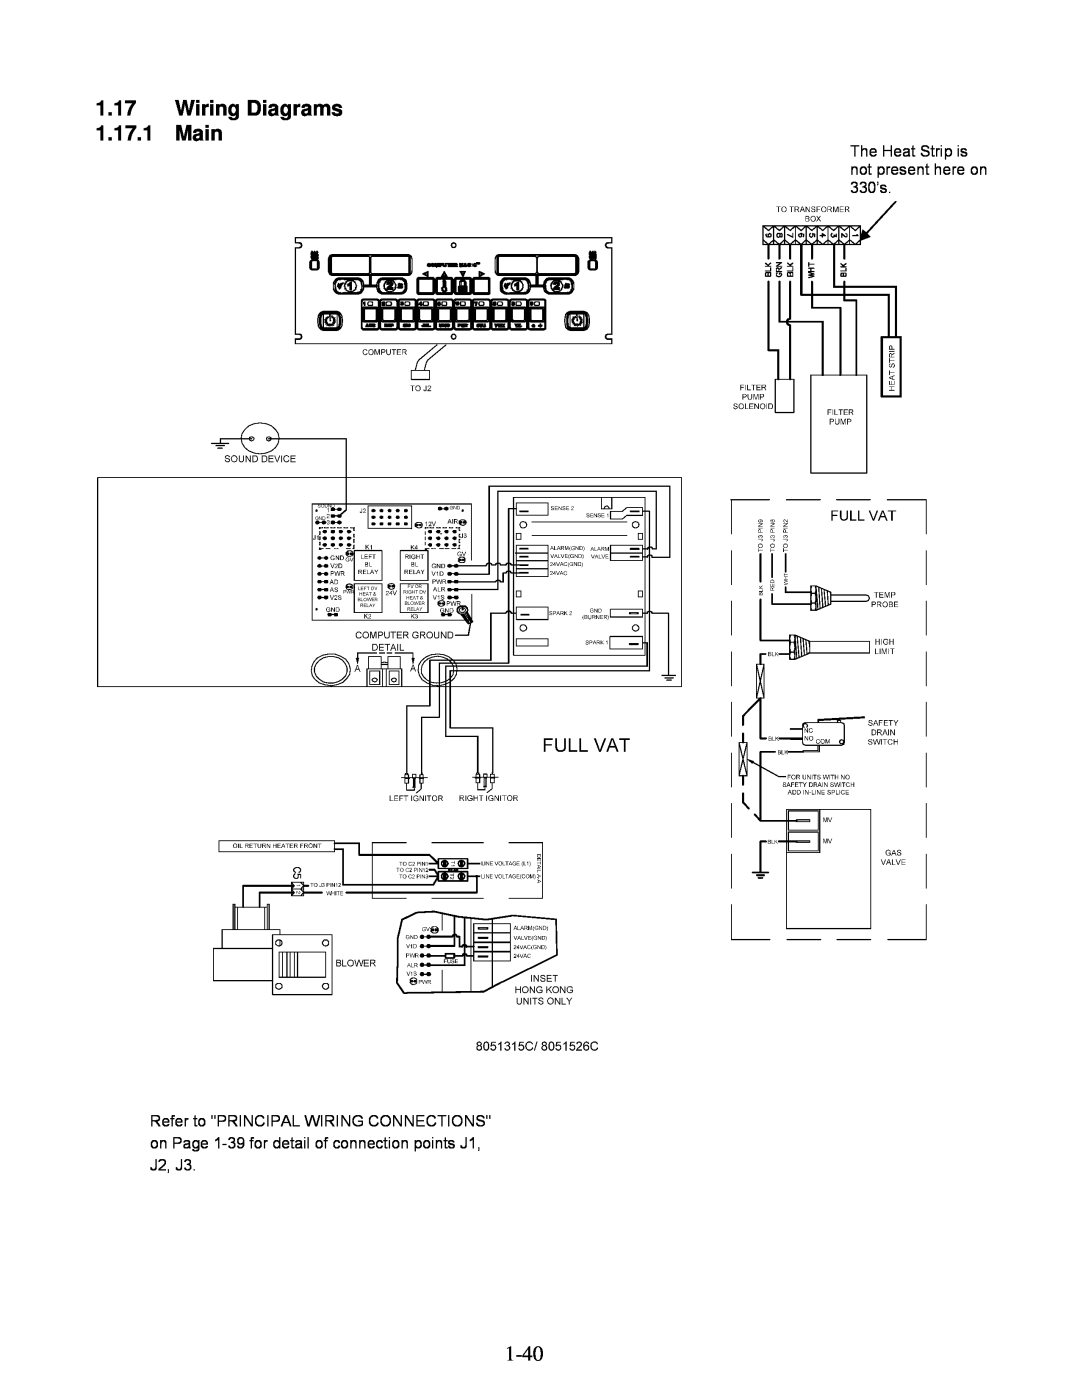 Frymaster 8196345 manual 1.17Wiring Diagrams 1.17.1 Main, The Heat Strip is not present here on 330’s 